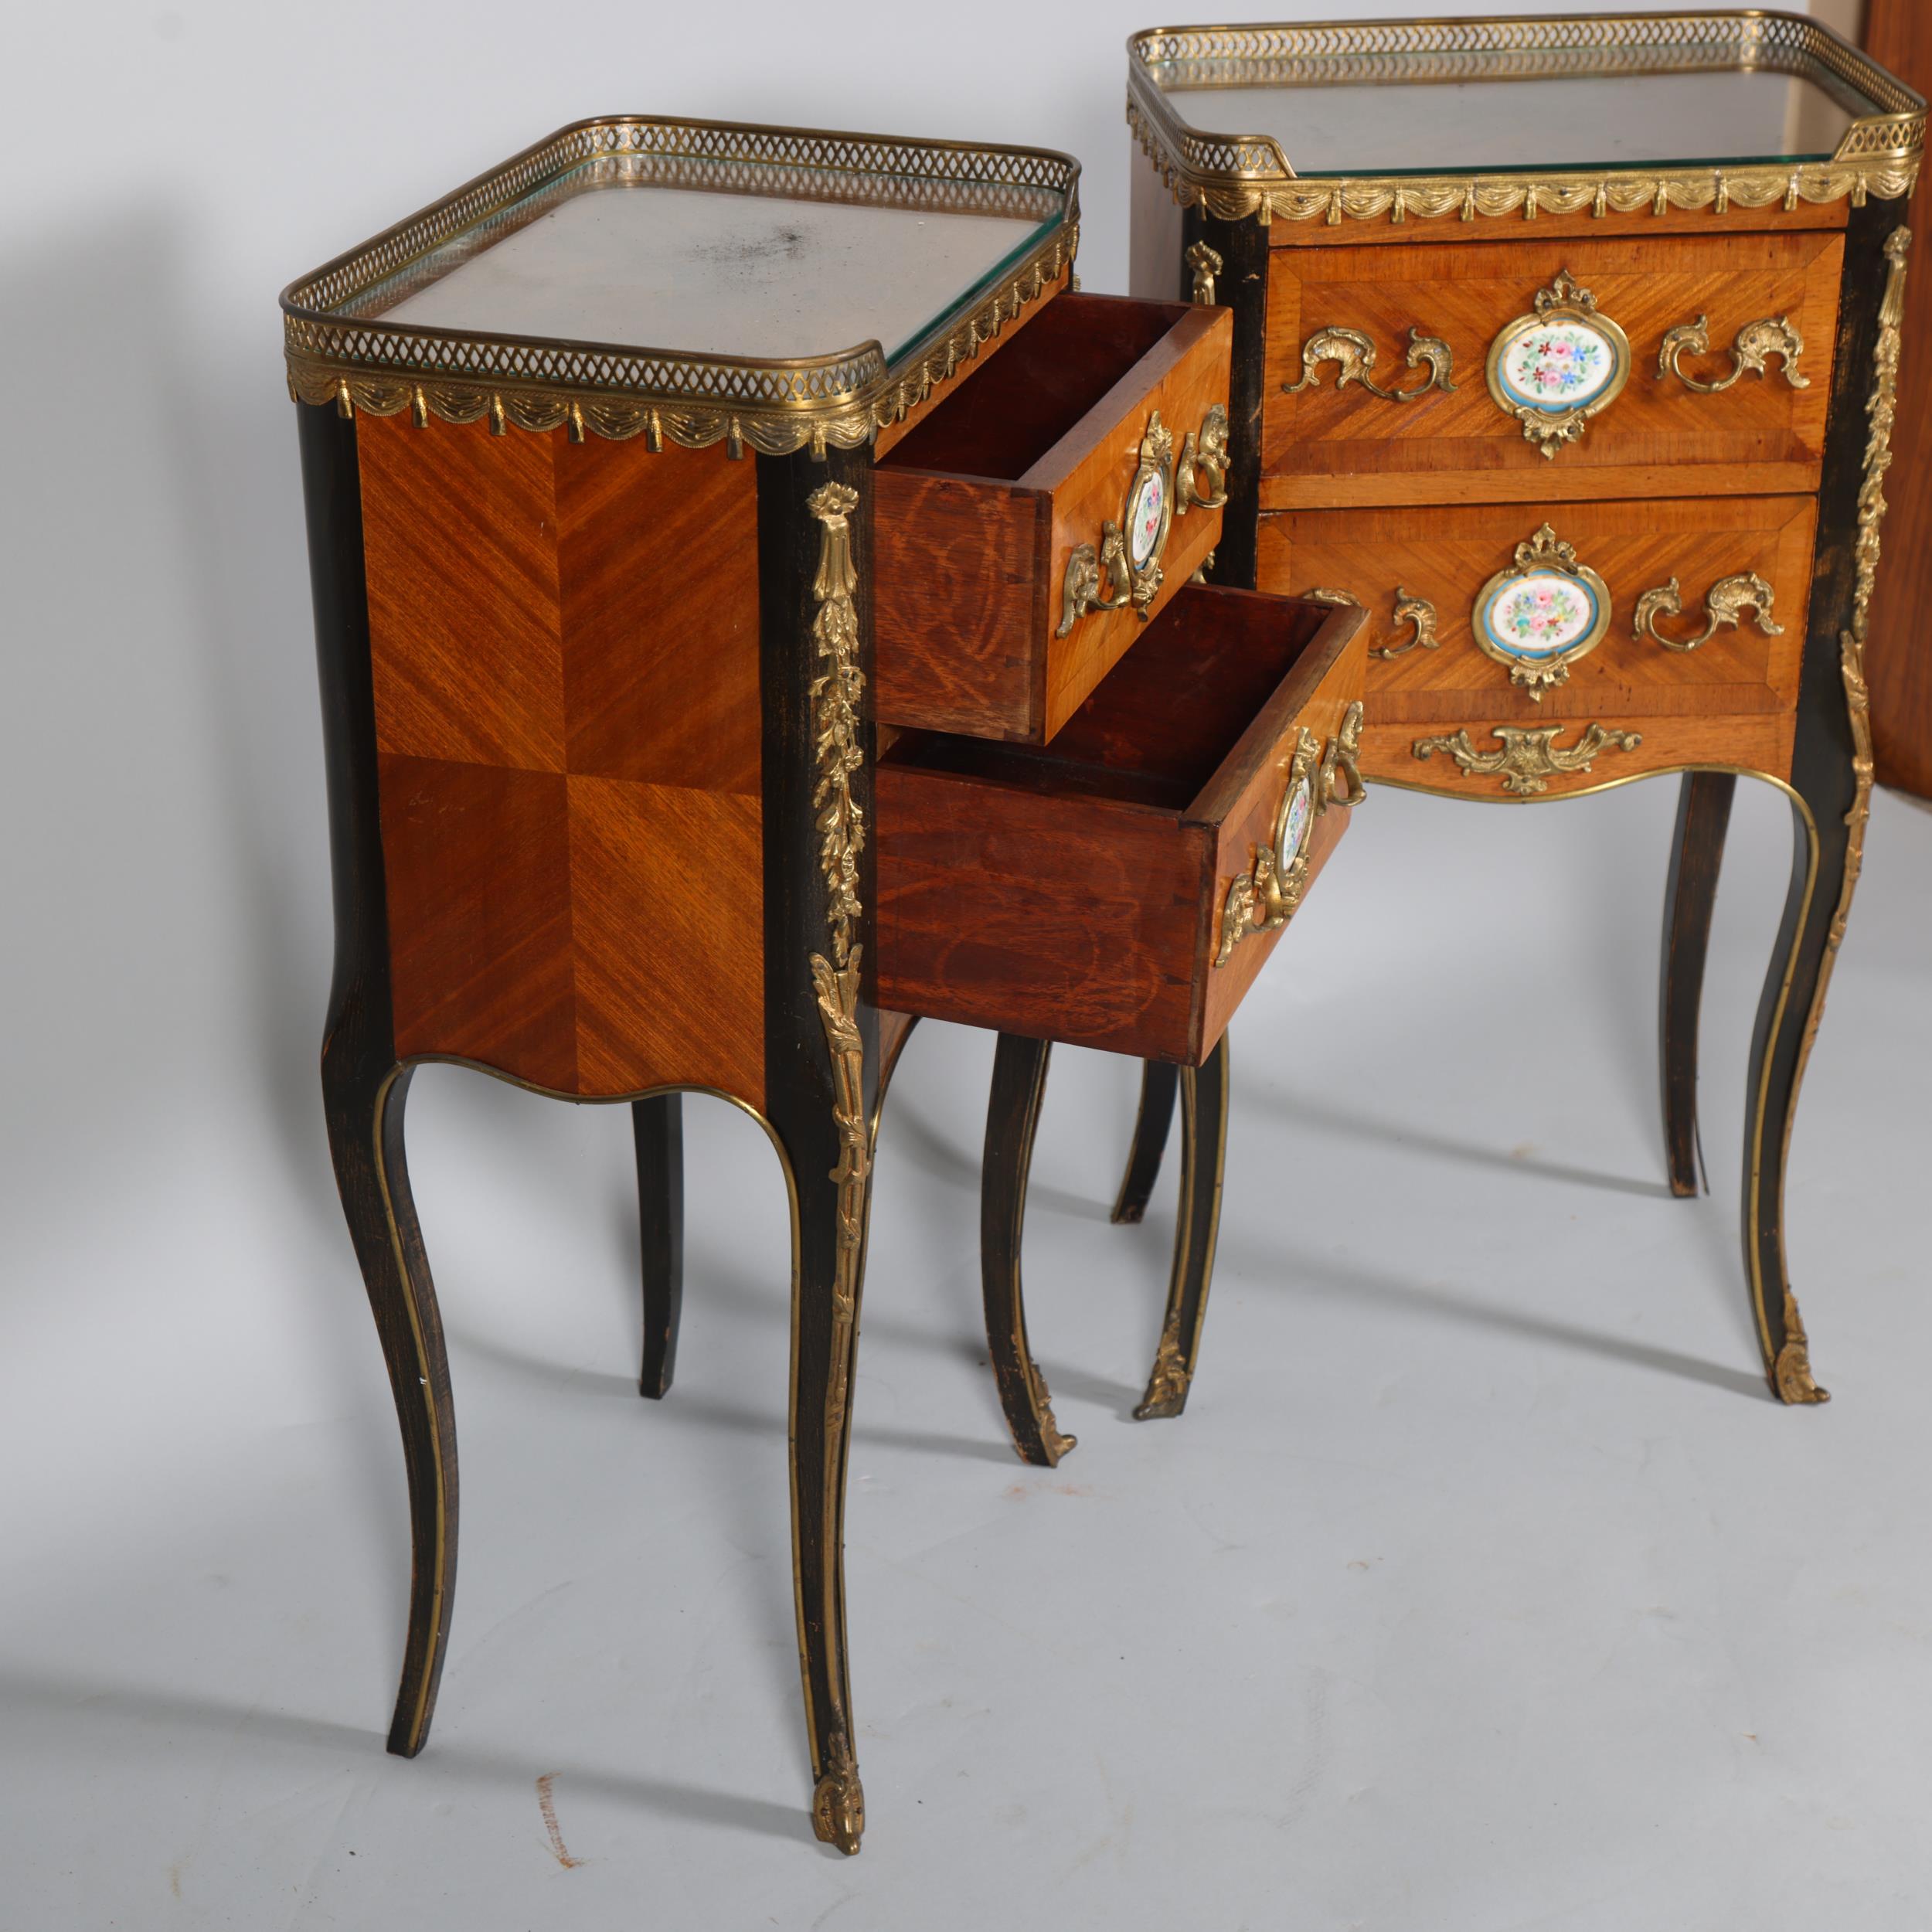 A pair of French walnut 2-drawer bedside chests, inset porcelain plaques to the drawer fronts, brass - Image 5 of 7